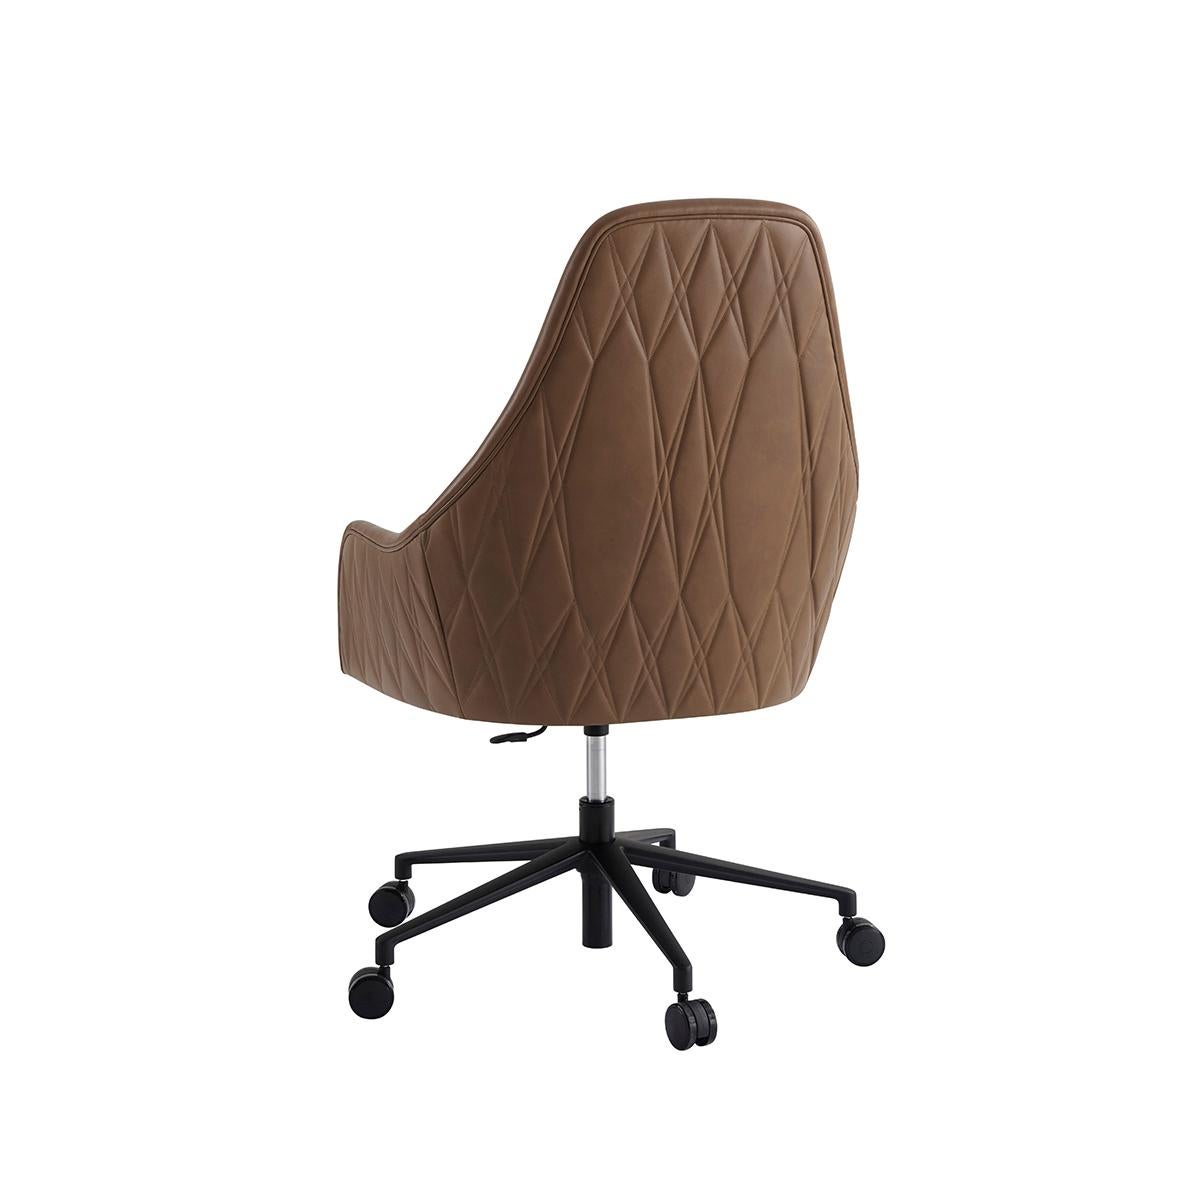 Modern Leather Quilted desk chair with a swivel seat, an arched upholstered back, and tight seat, with padded arms, the outside back in a diamond quilted pattern and raised on an adjustable matt black steel base with castors.

Dimensions: 28.75